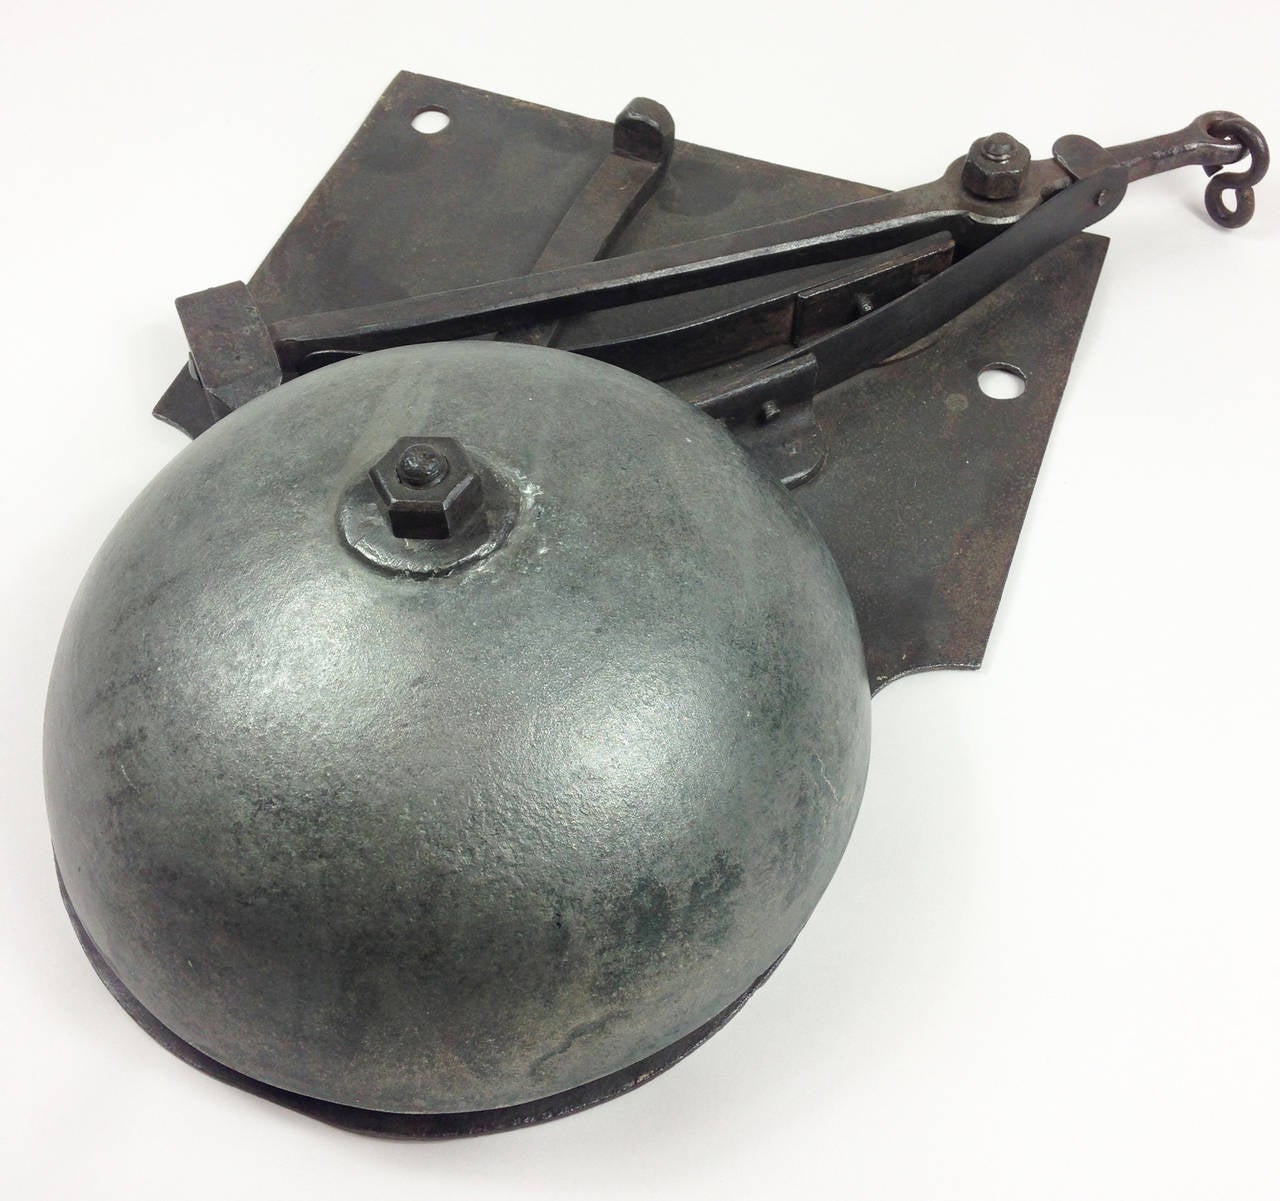 A wonderful iron bell which originated from a convent in Northern France. 

Operated by simply attaching a cord or chain to the end of the swing arm. Still works very well with a lovely loud ring.

France, early 20th century.